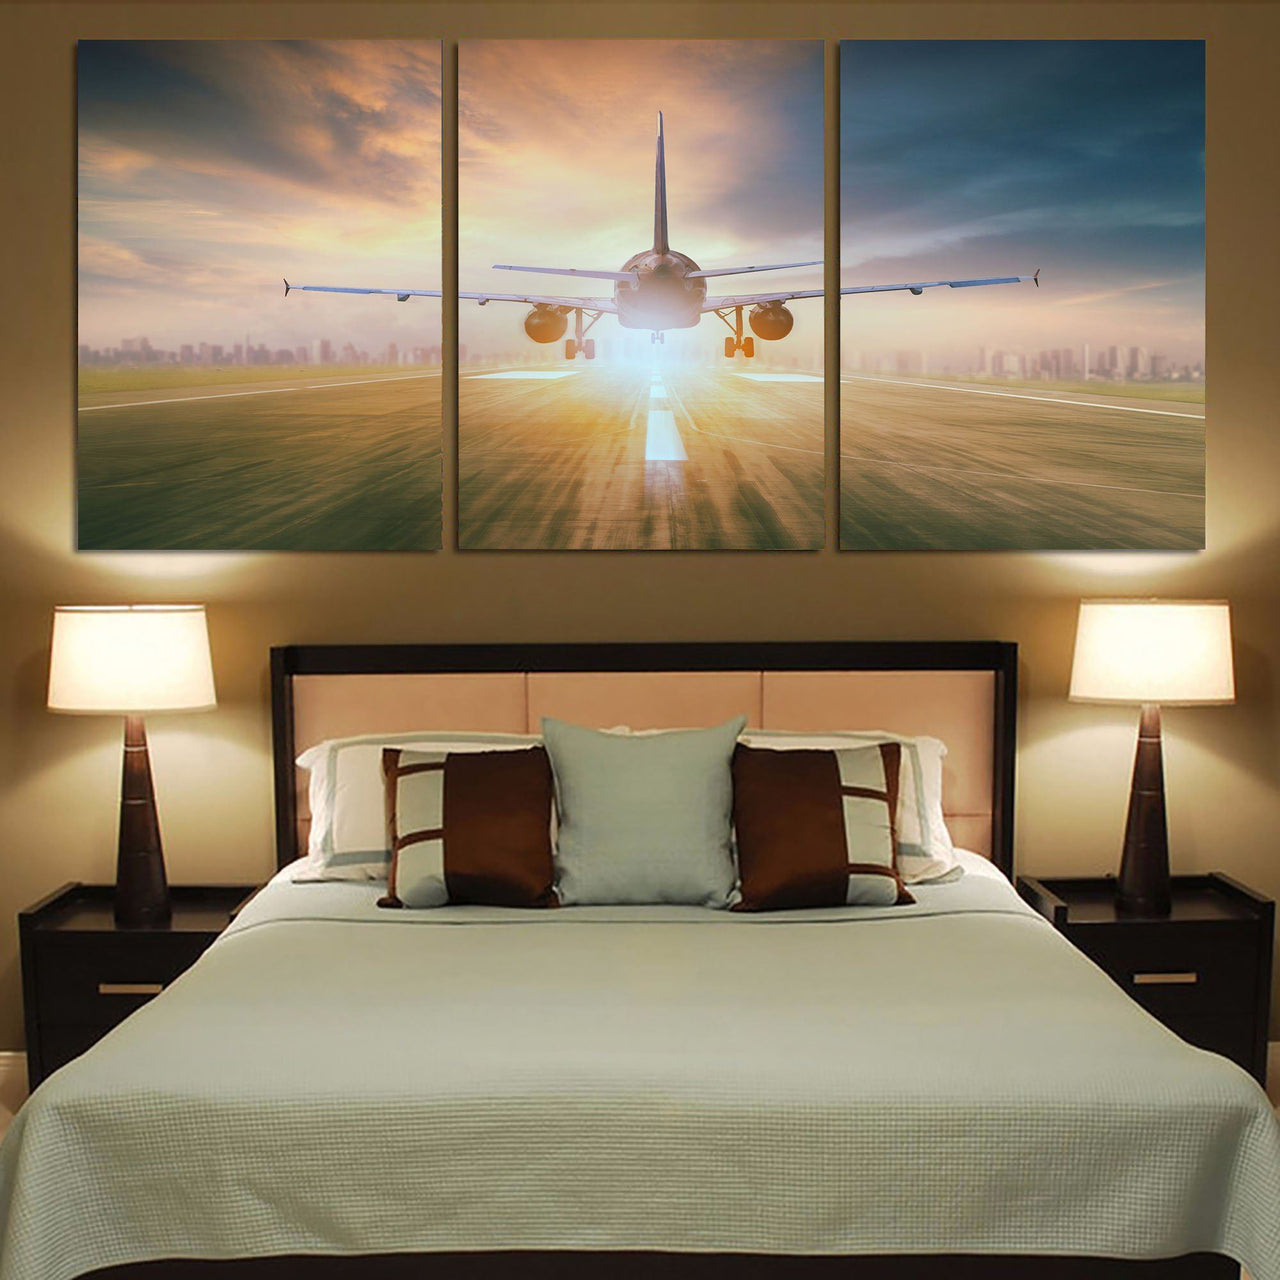 Airplane Flying Over Runway Printed Canvas Posters (3 Pieces) Aviation Shop 